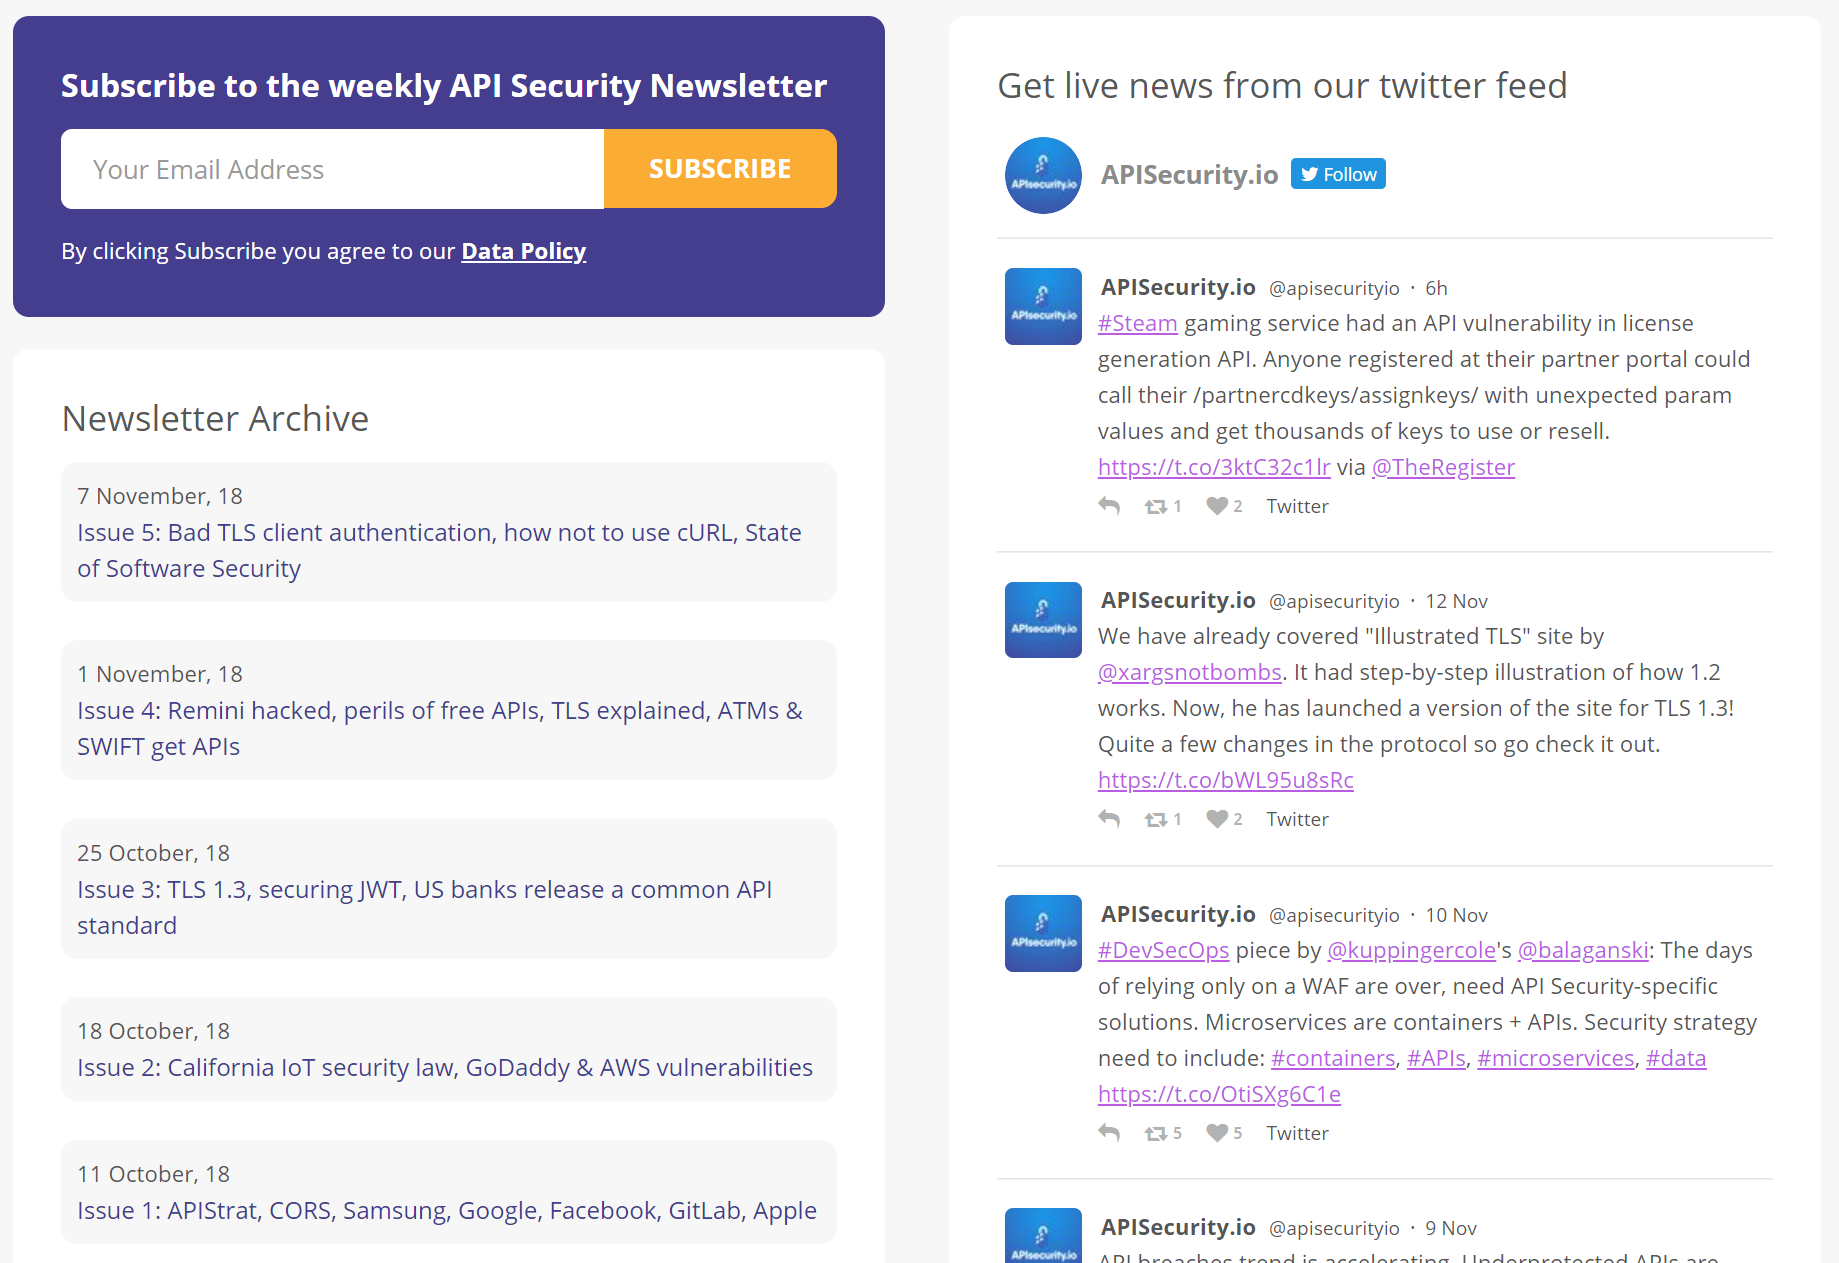 API Security newsletter and news feed